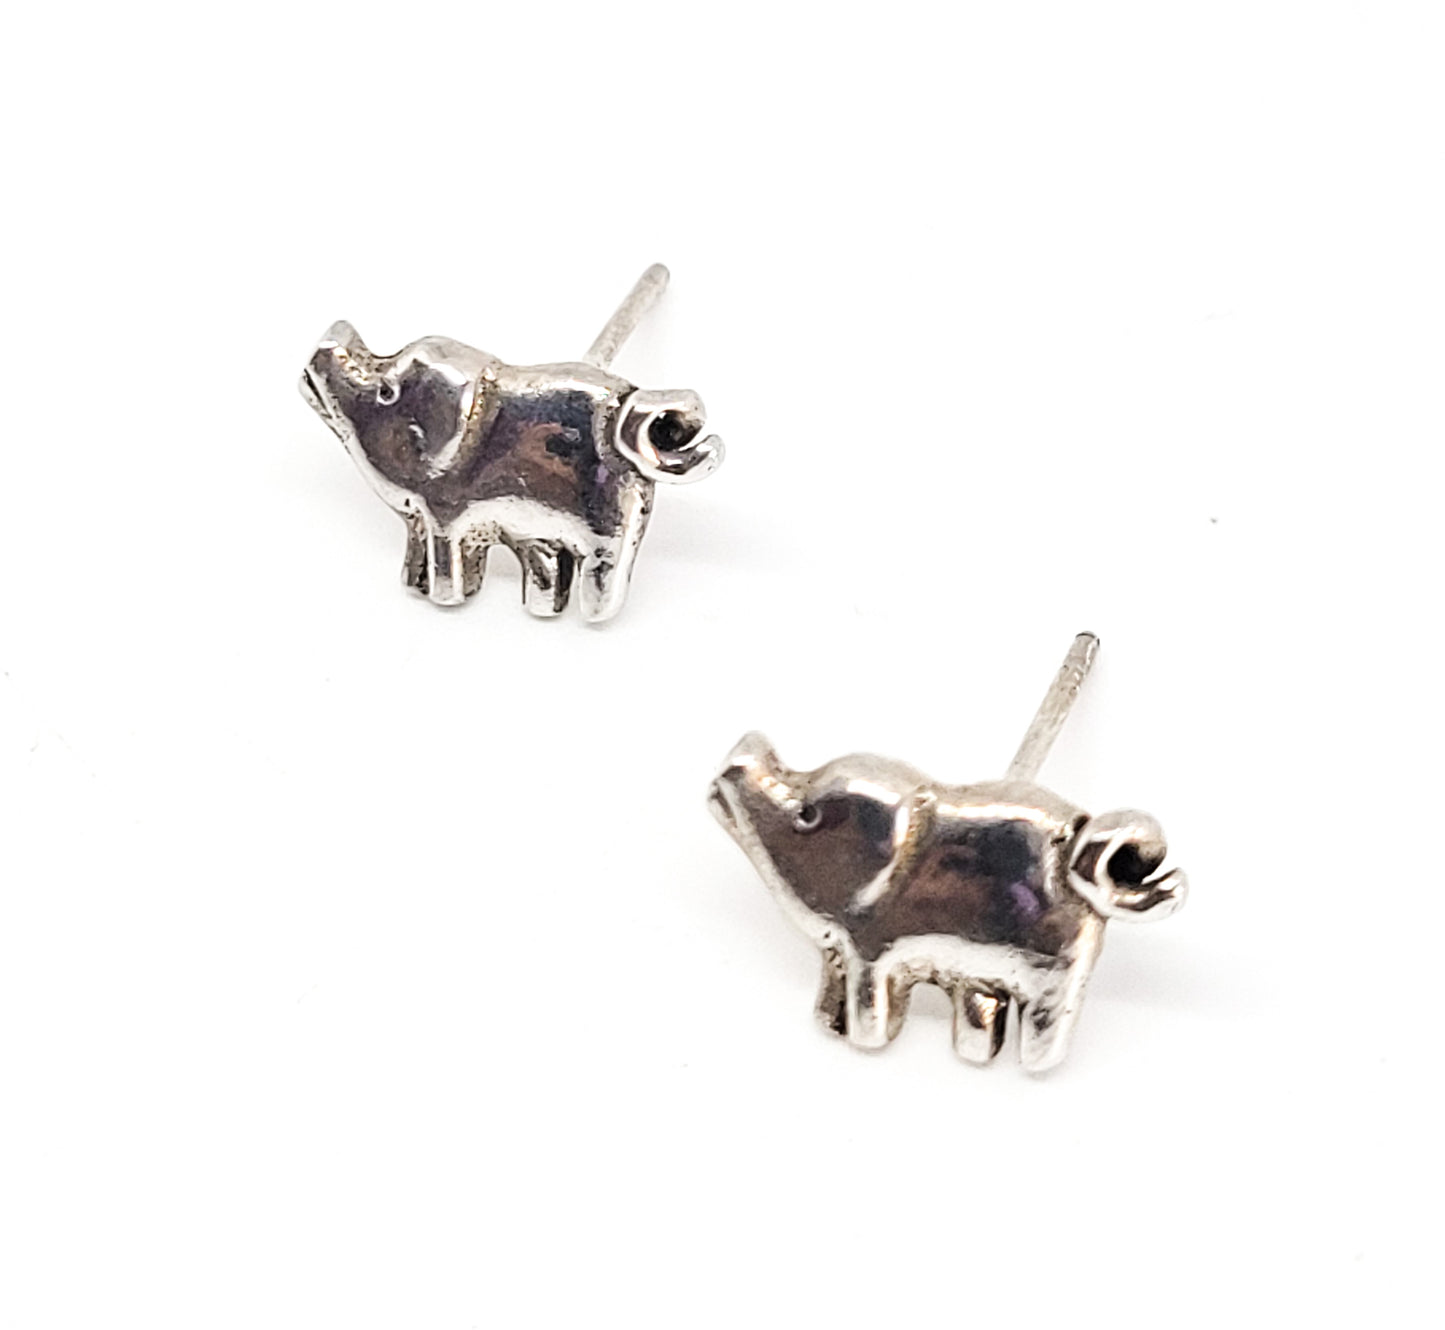 Happy pig curly tail figural farm sterling silver vintage stud earrings 925